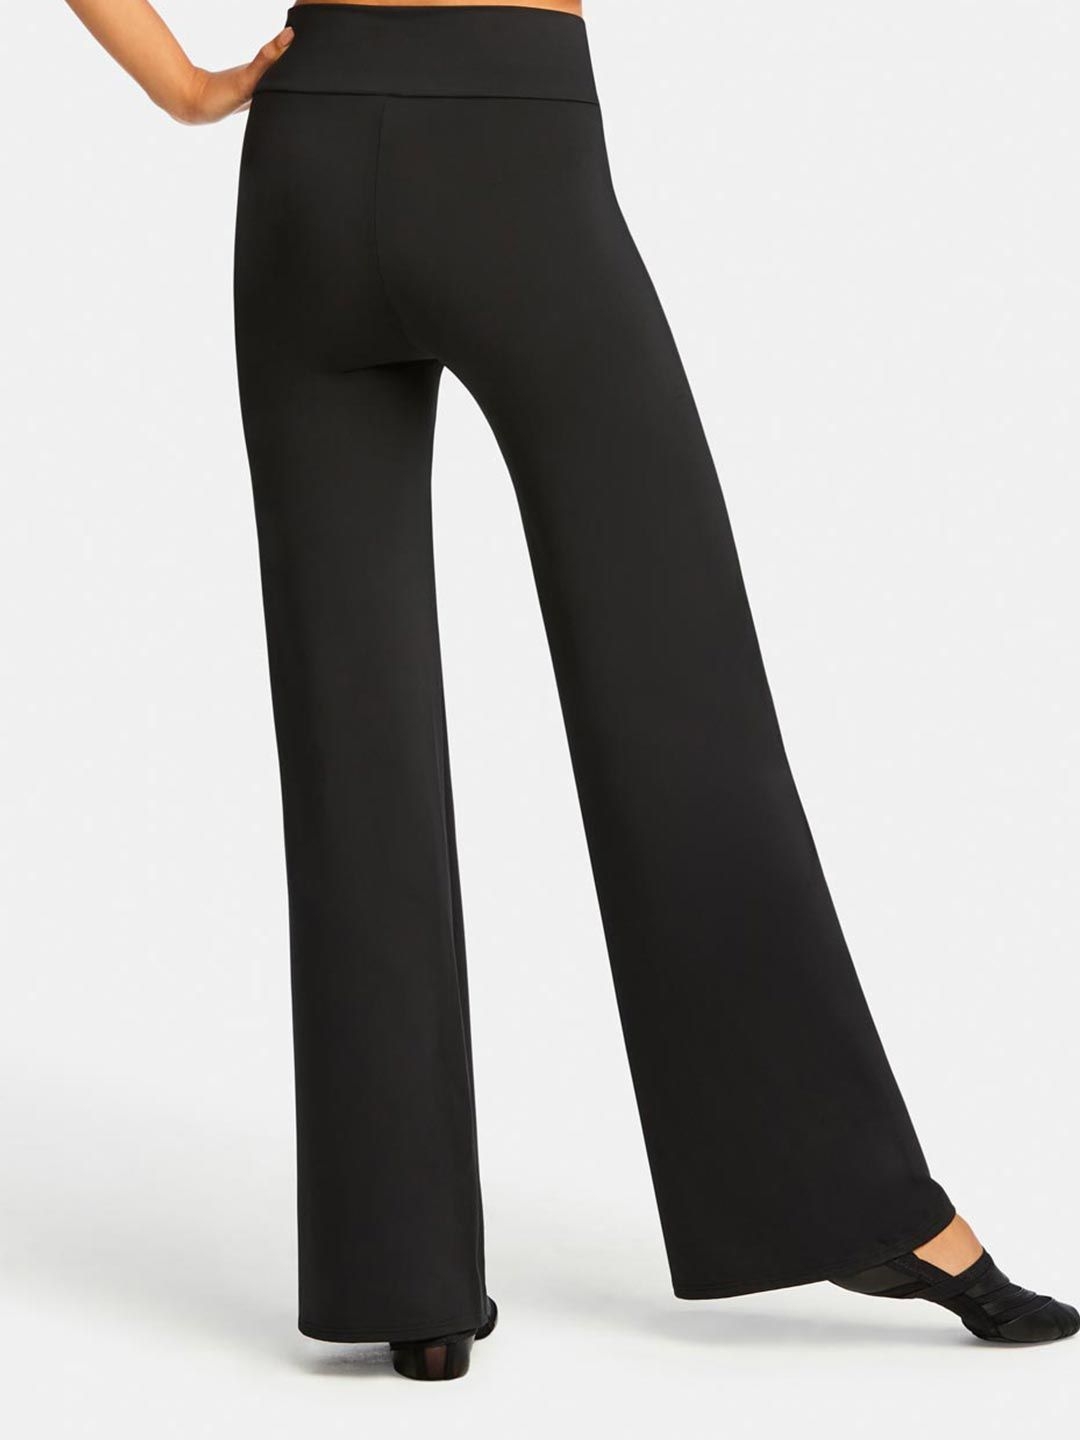 Women's Dance Pants, Capezio, Groove Wide Leg Pants 11177W, $35.00, from  VEdance LLC, The very best in ballroom and Latin dance shoes and dancewear.